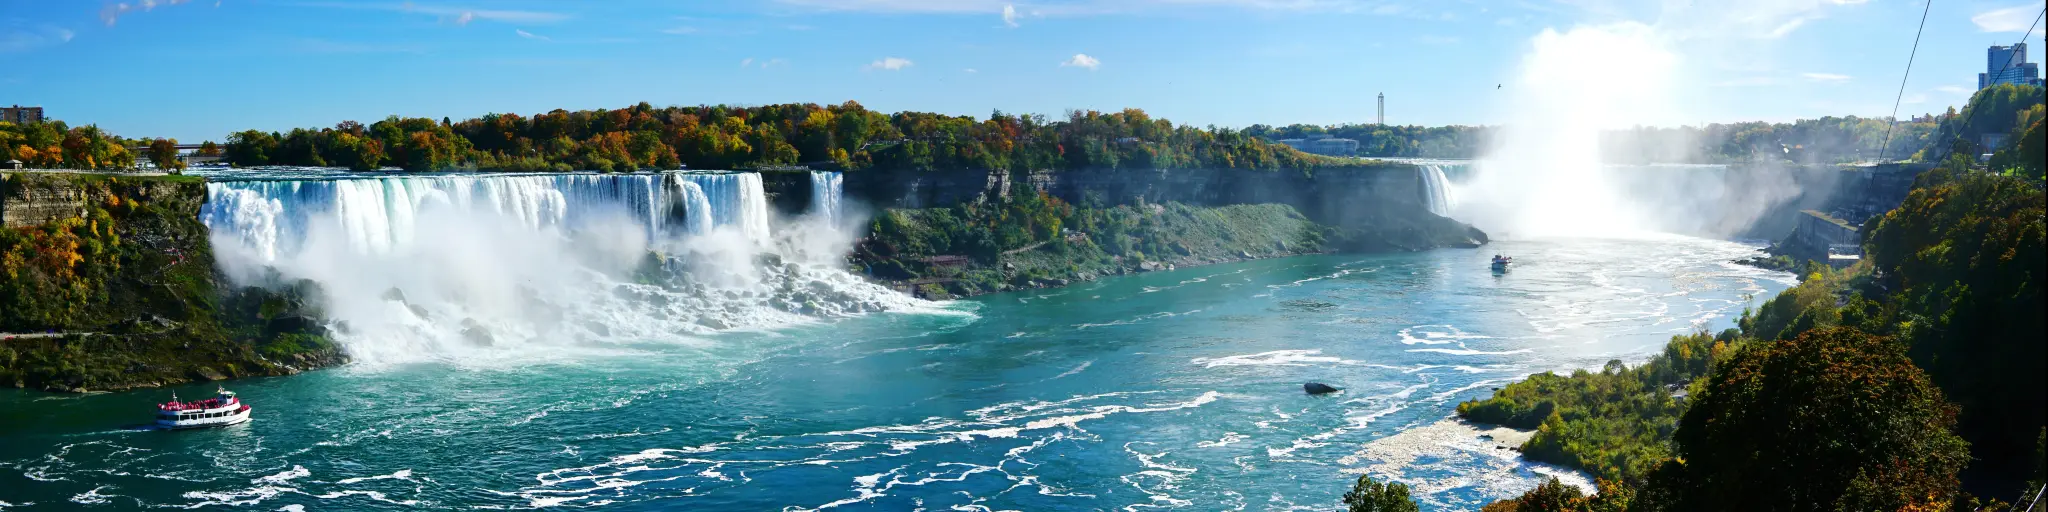 Panoramic view of Niagara falls on a bright summers day